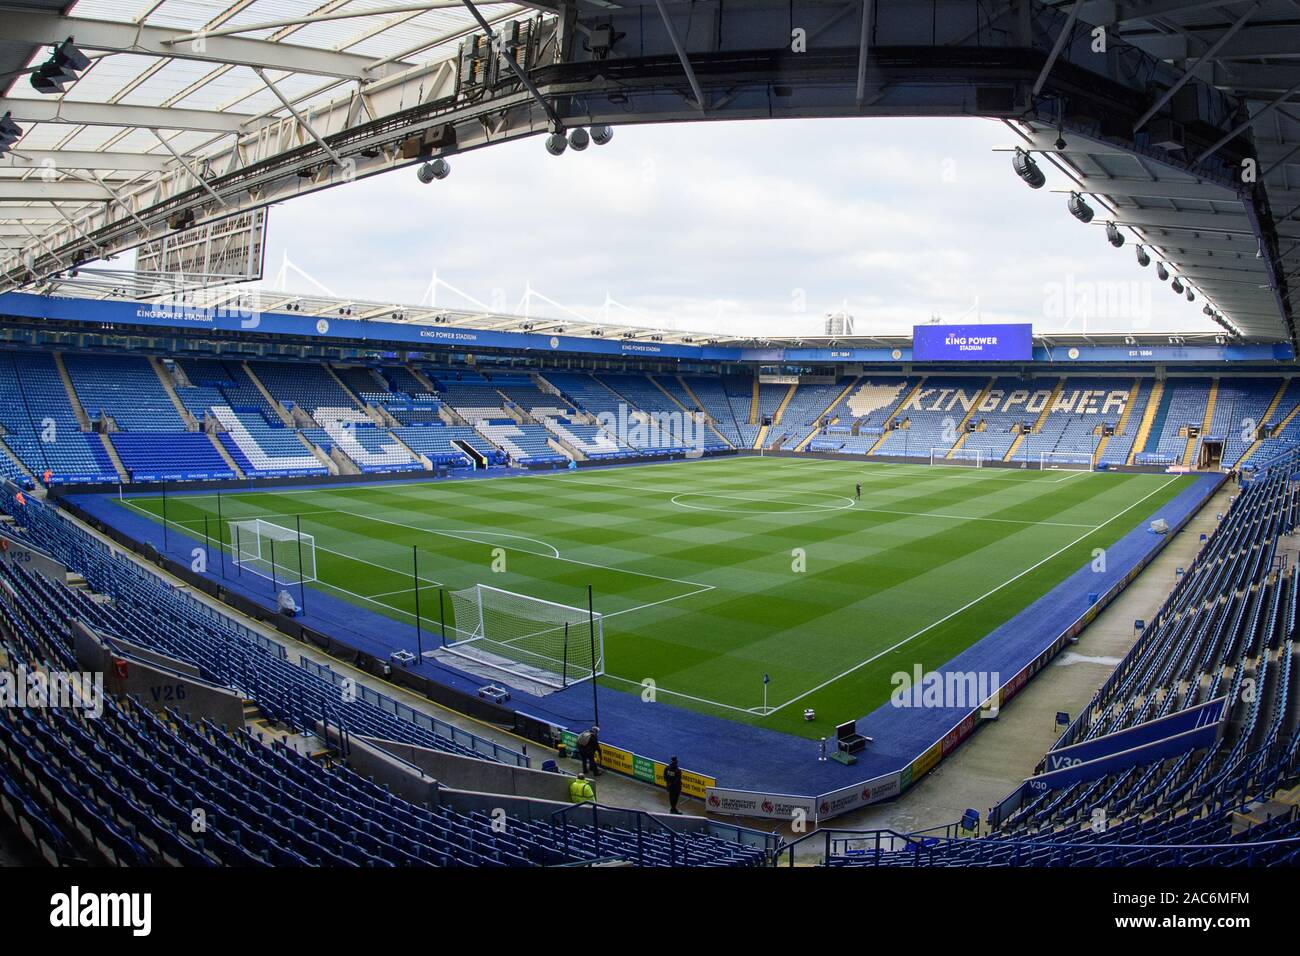 King Power Stadium High Resolution Stock Photography and Images - Alamy